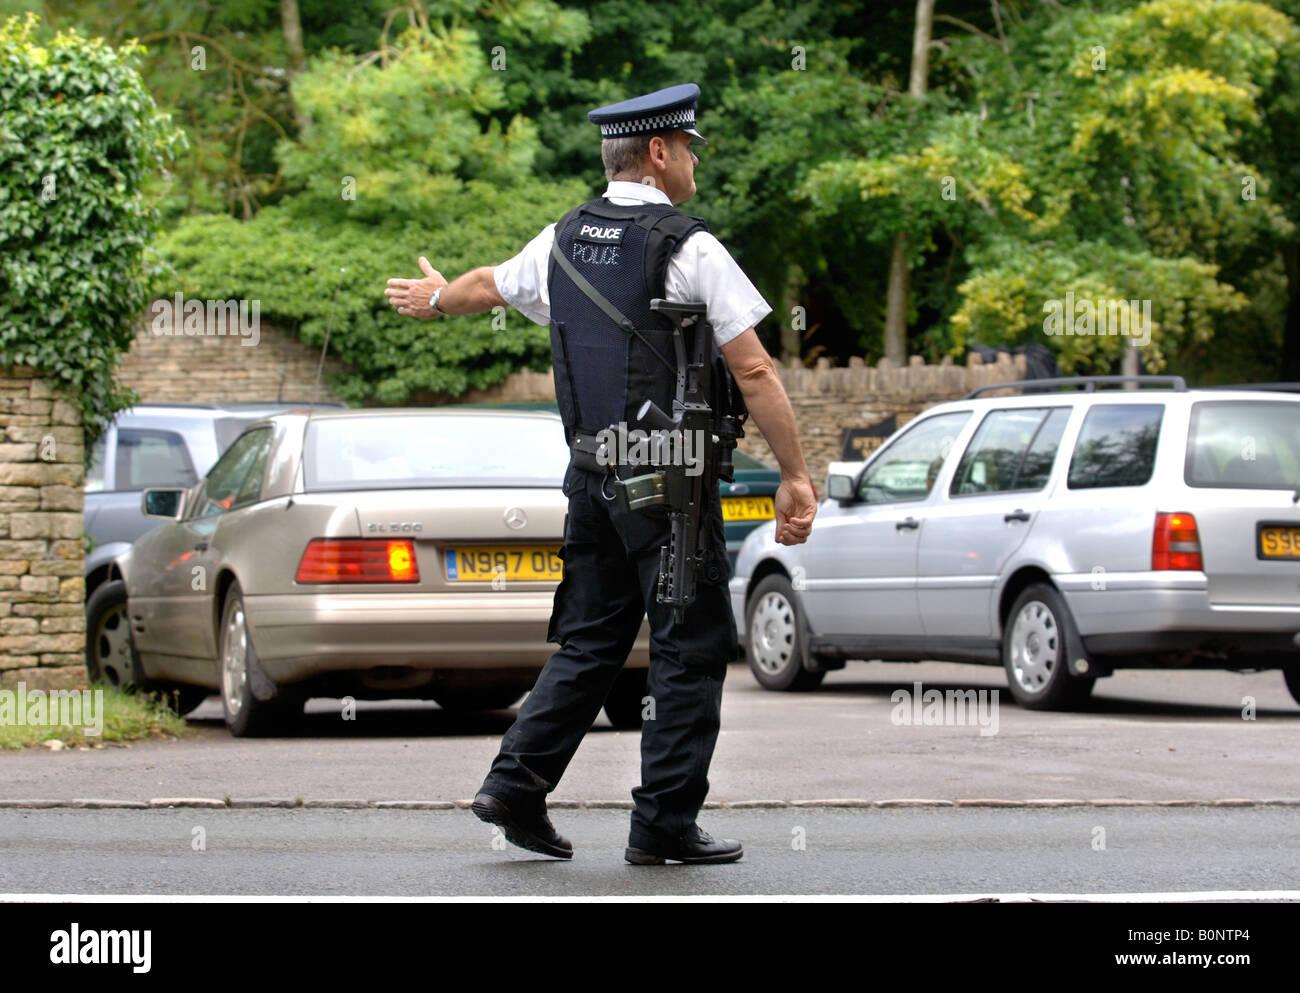 ARMED POLICE CHECK VISITORS TO HIGHGROVE THE GLOUCESTERSHIRE HOME OF PRINCE CHARLES JULY 2007 Stock Photo